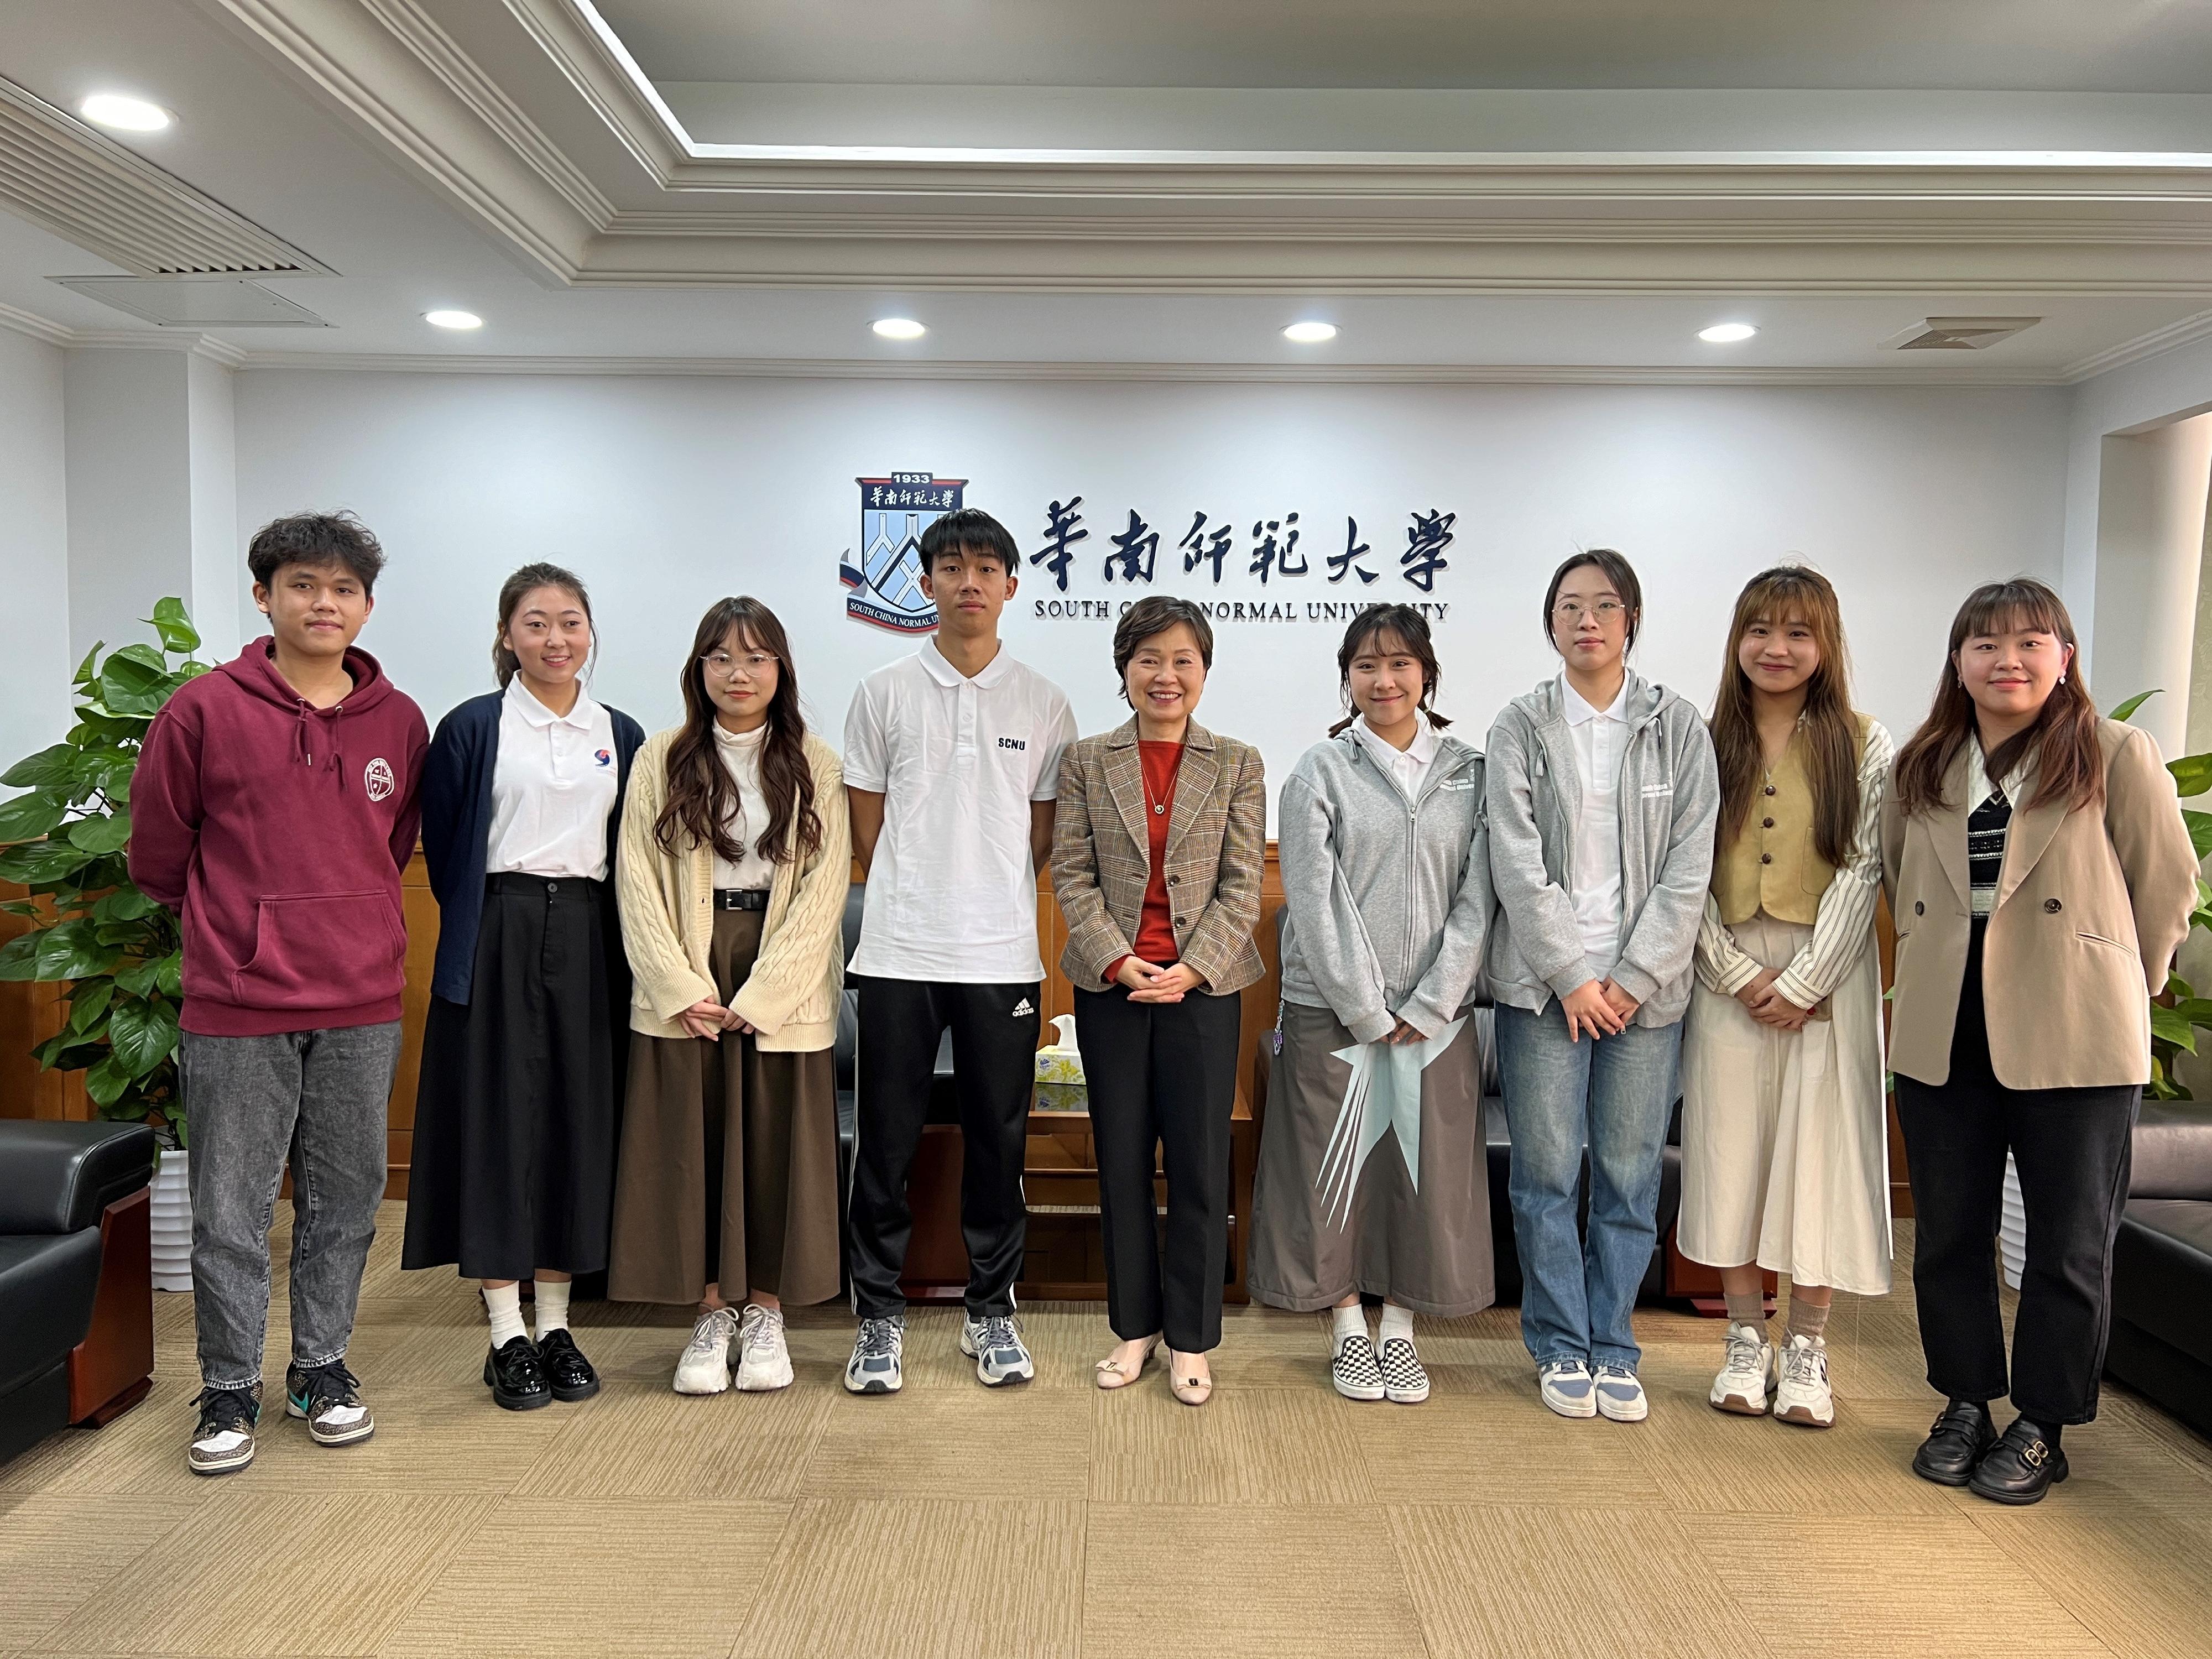 The Secretary for Education, Dr Choi Yuk-lin (centre), today (January 10) met Hong Kong students studying at South China Normal University during her visit to the university in Guangzhou.